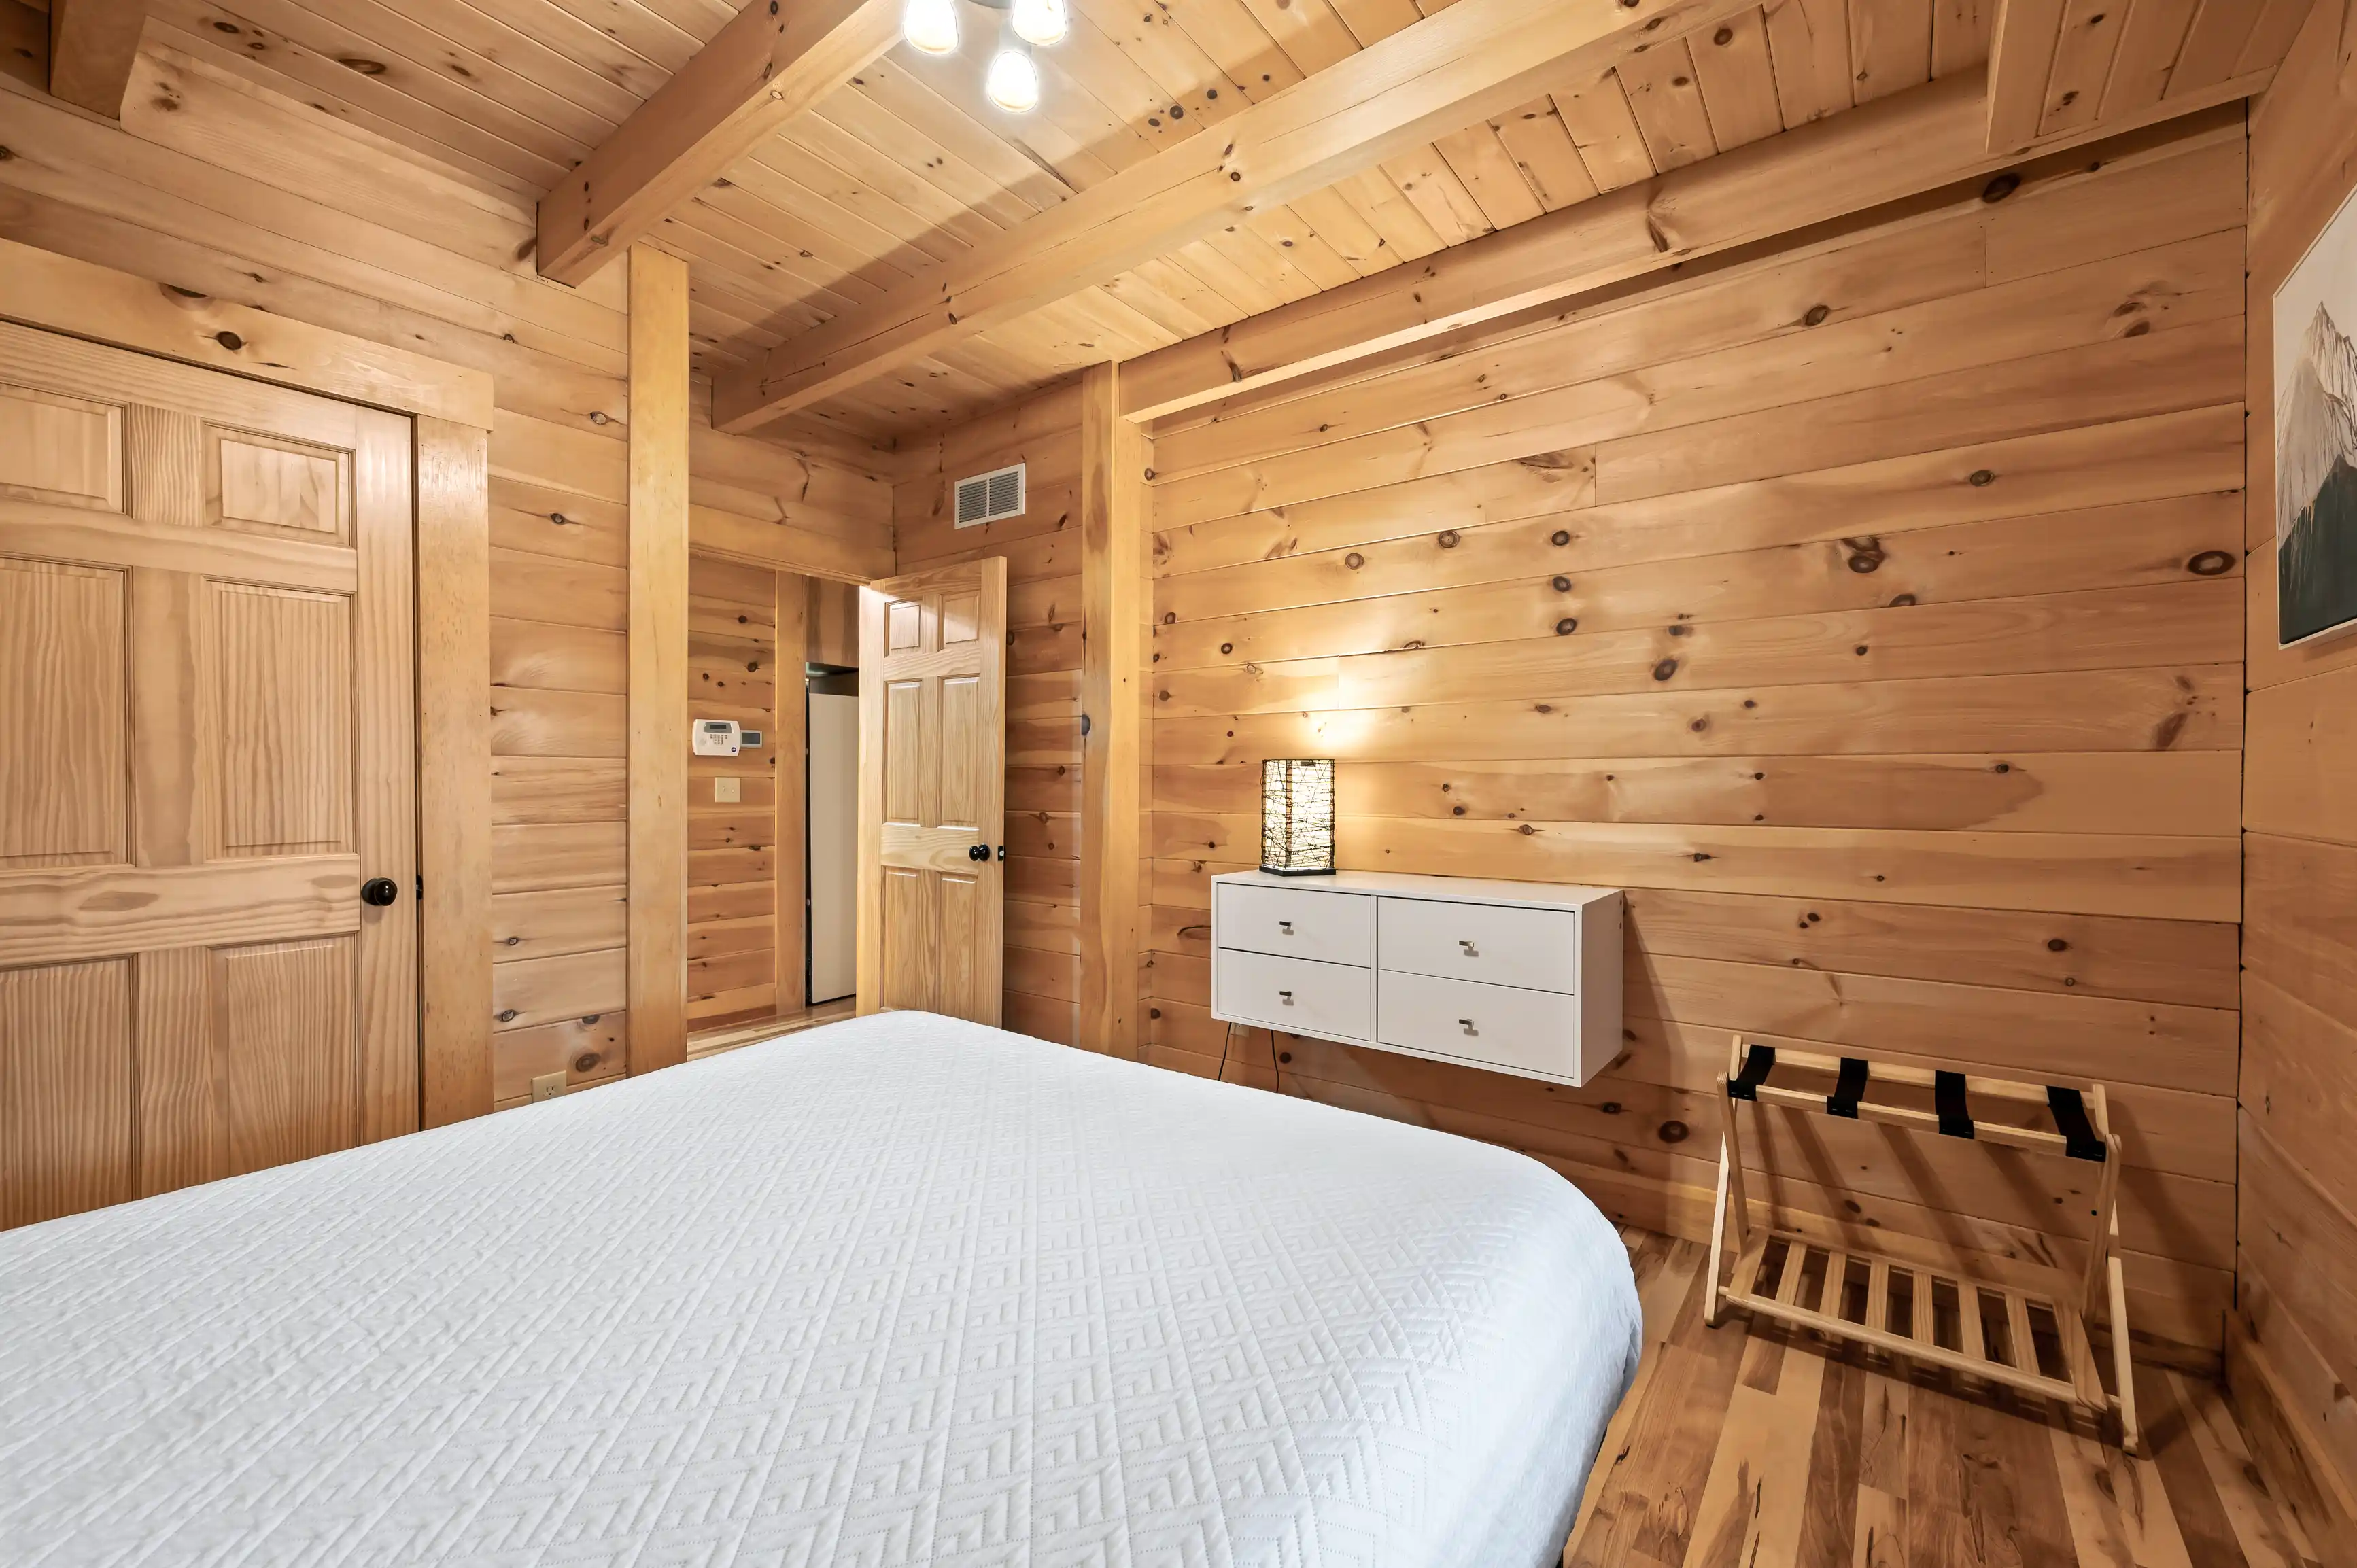 Cozy wooden cabin bedroom interior with a large bed, white bedding, natural wood walls, ceiling, and floors, complemented by modern light fixtures and simple furnishings.